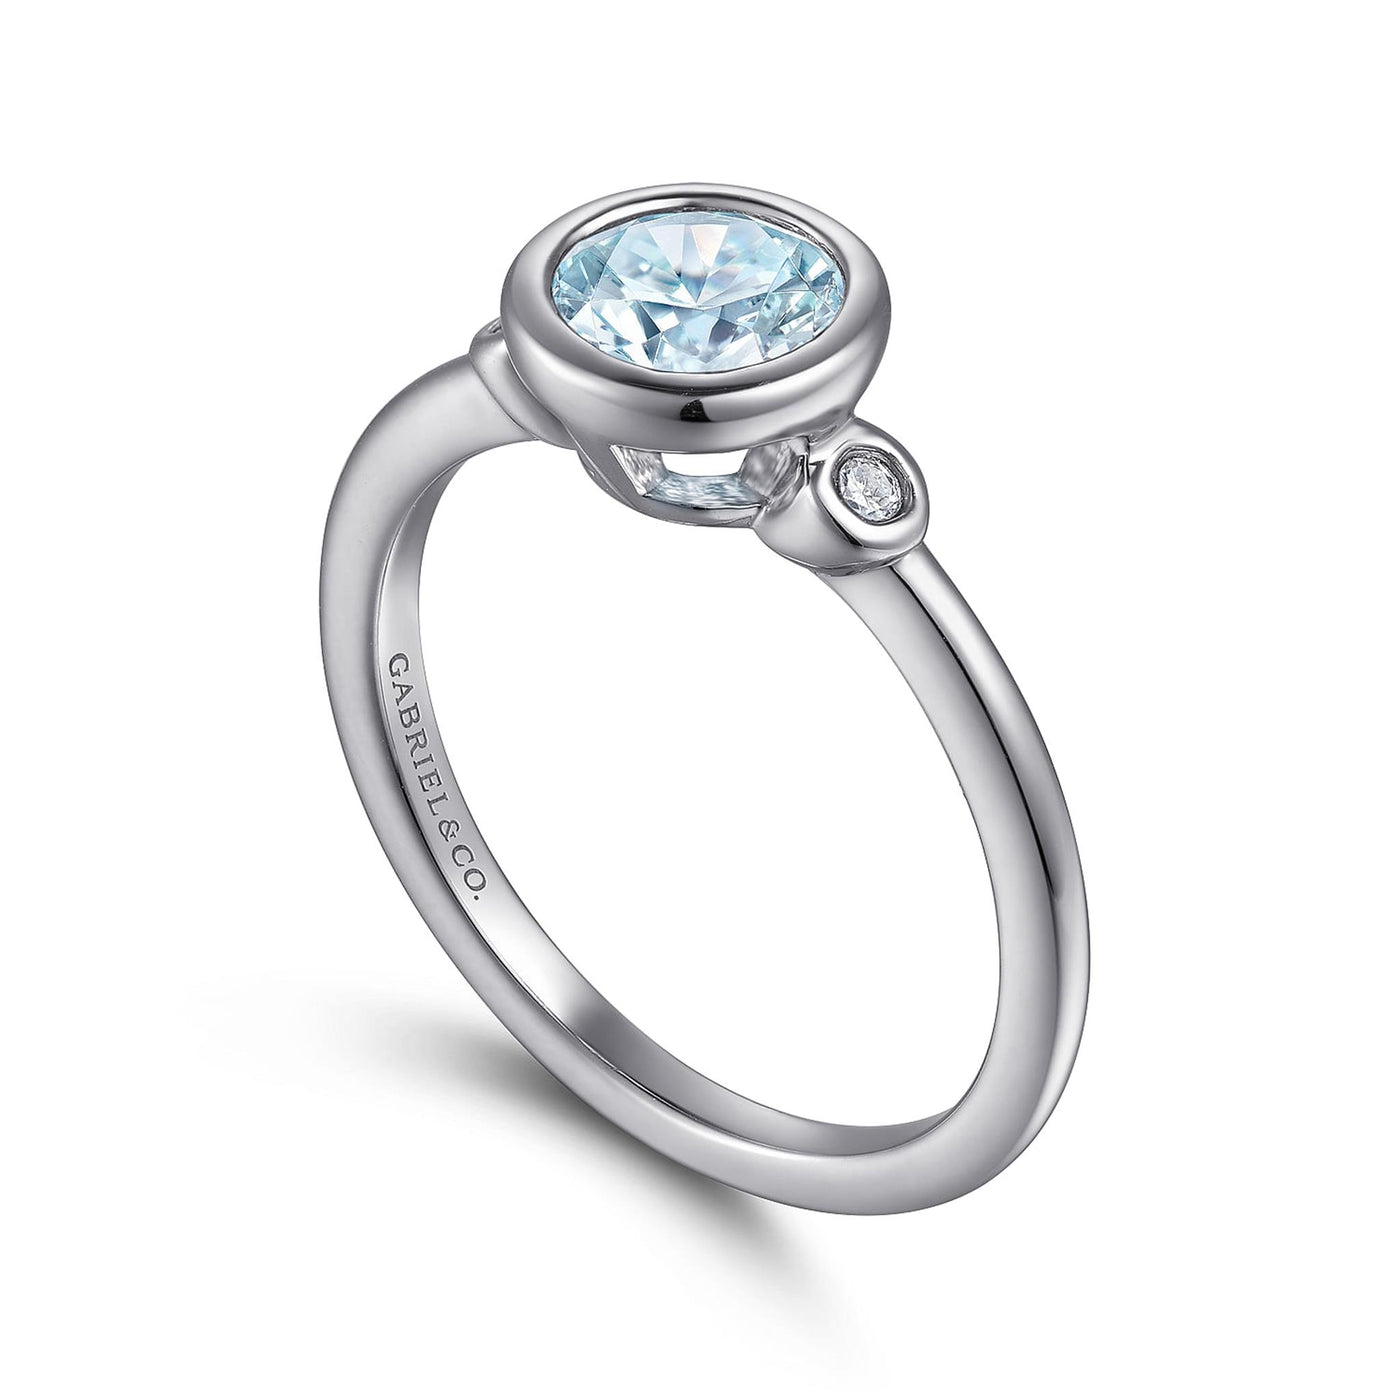 Sterling Silver .81ctw Three Stone Style Aquamarine Ring with Diamonds